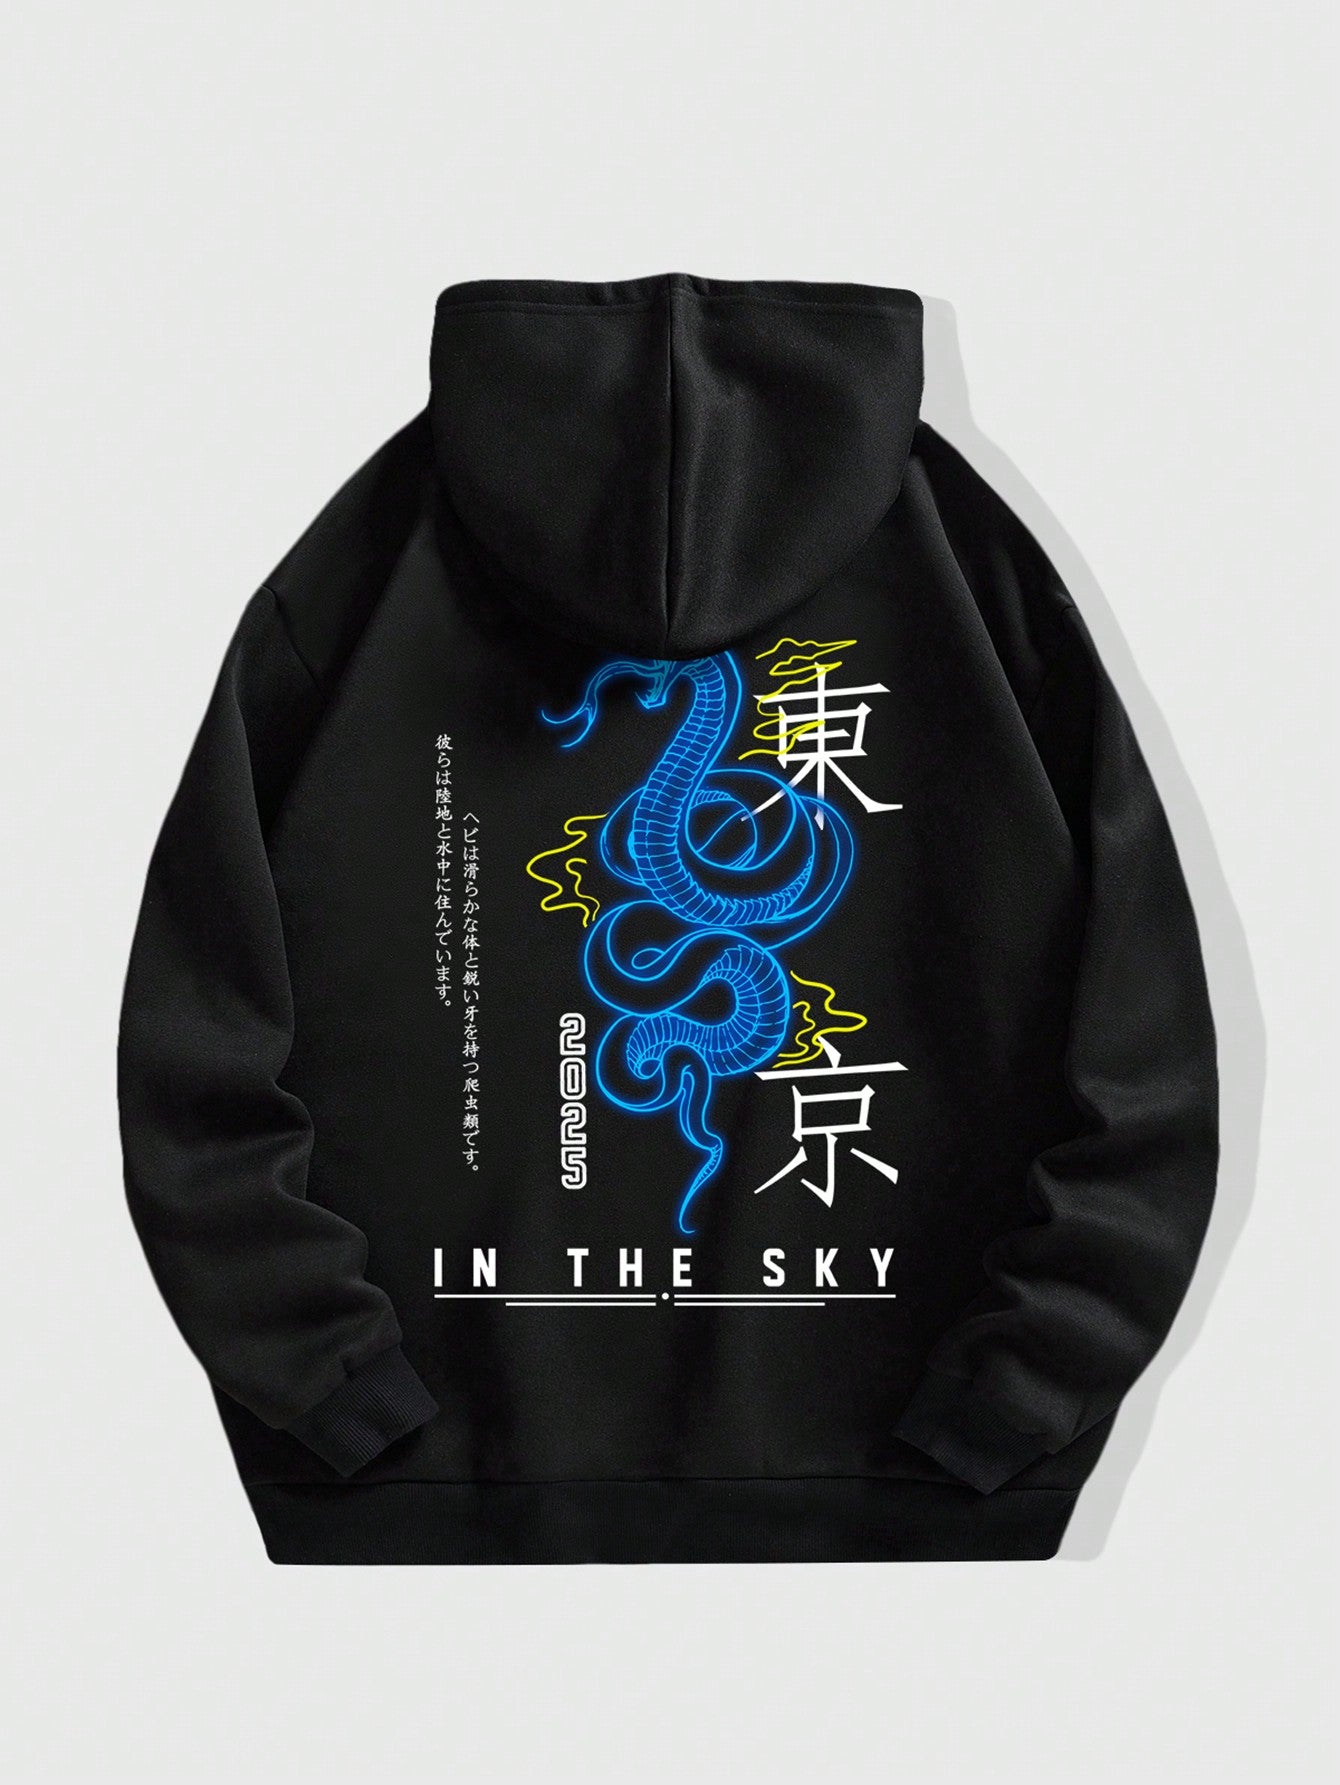 Men's Hoodie With Drawstring And Letter & Dragon Print